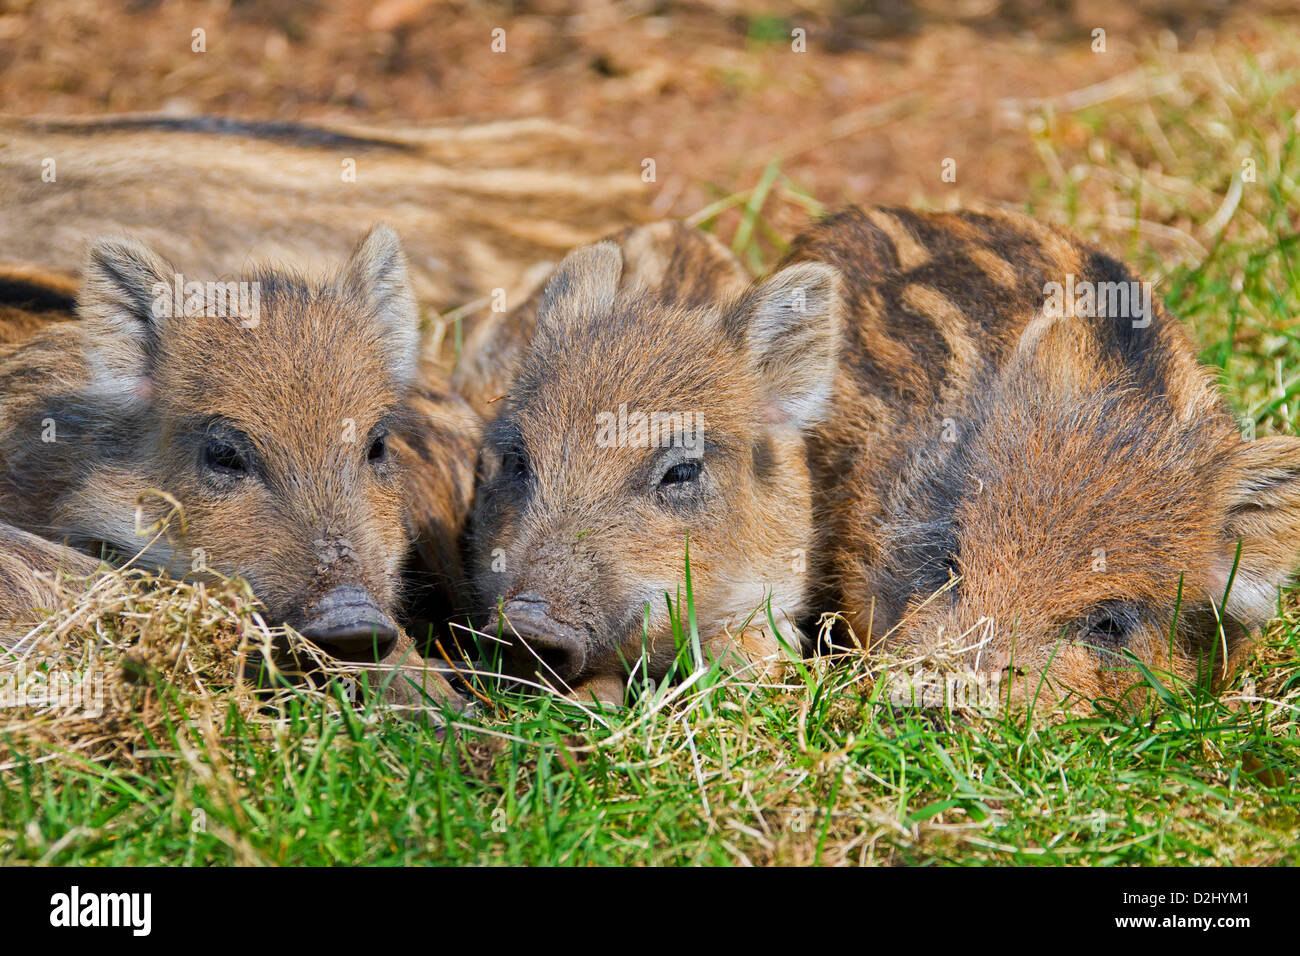 Three wild boar (Sus scrofa) piglets sleeping huddled together in forest in spring, Germany Stock Photo